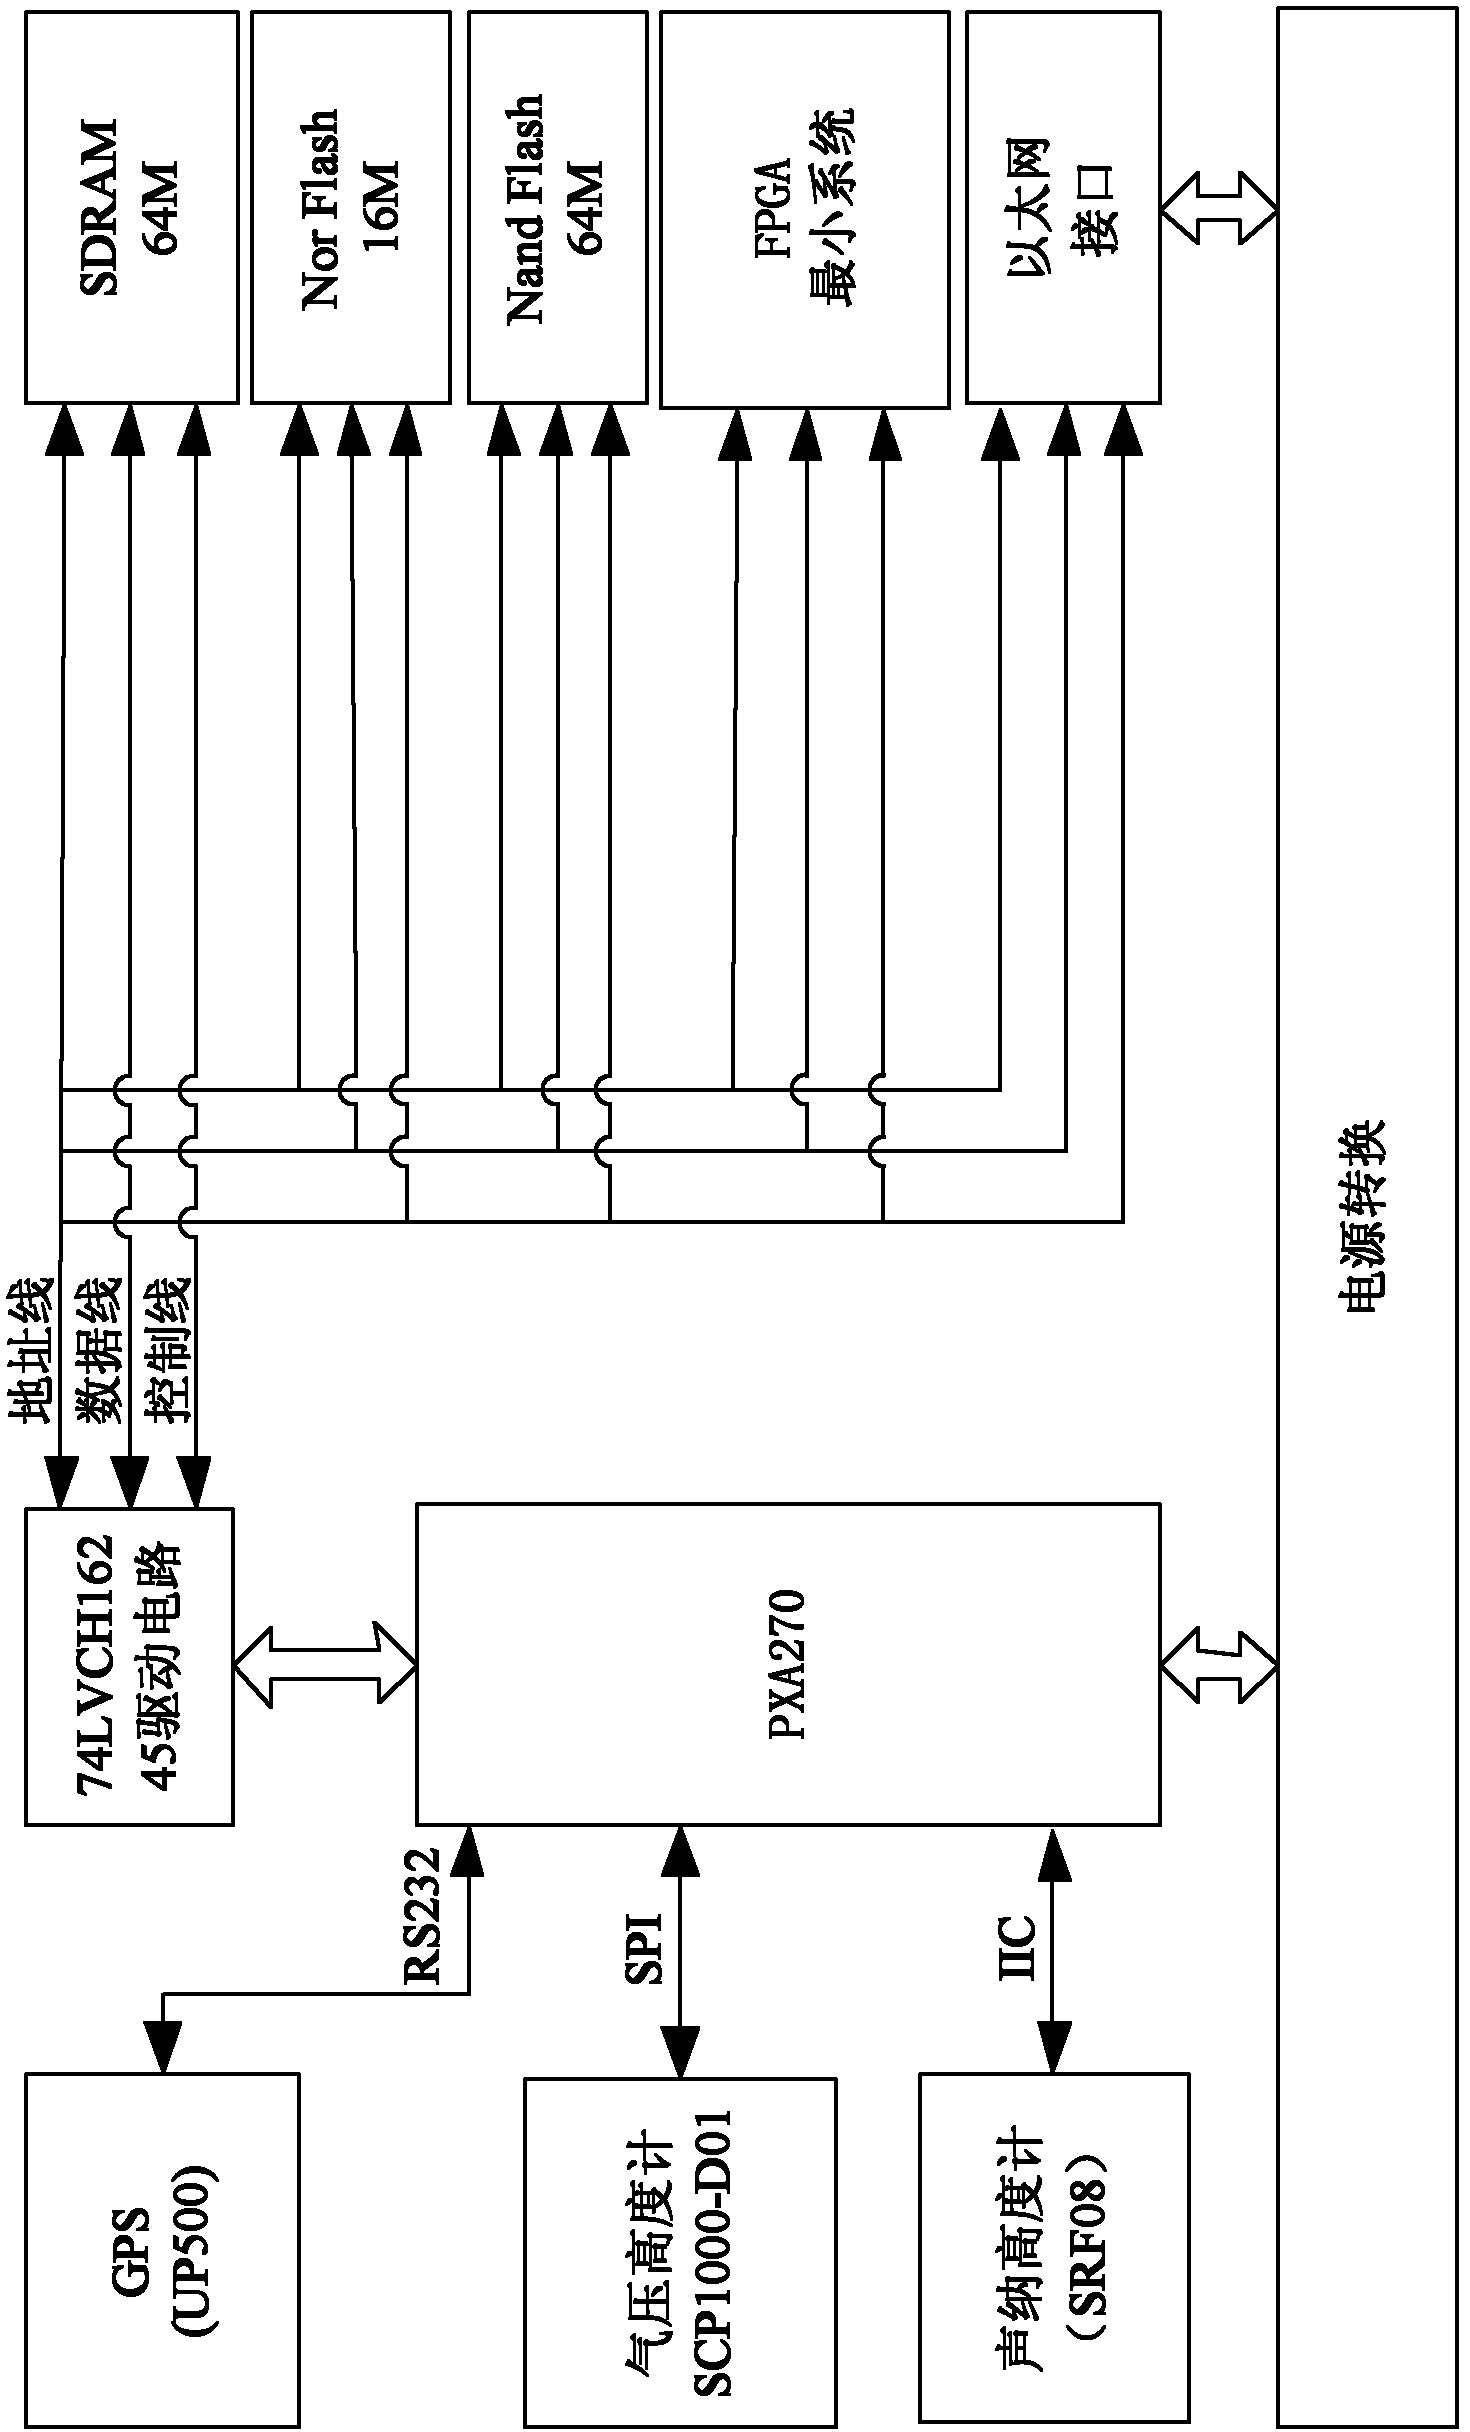 ARM (advanced RISC (reduced instruction set computer) machines) and FPGA (field-programmable gate array) based navigation and flight control system for unmanned helicopter